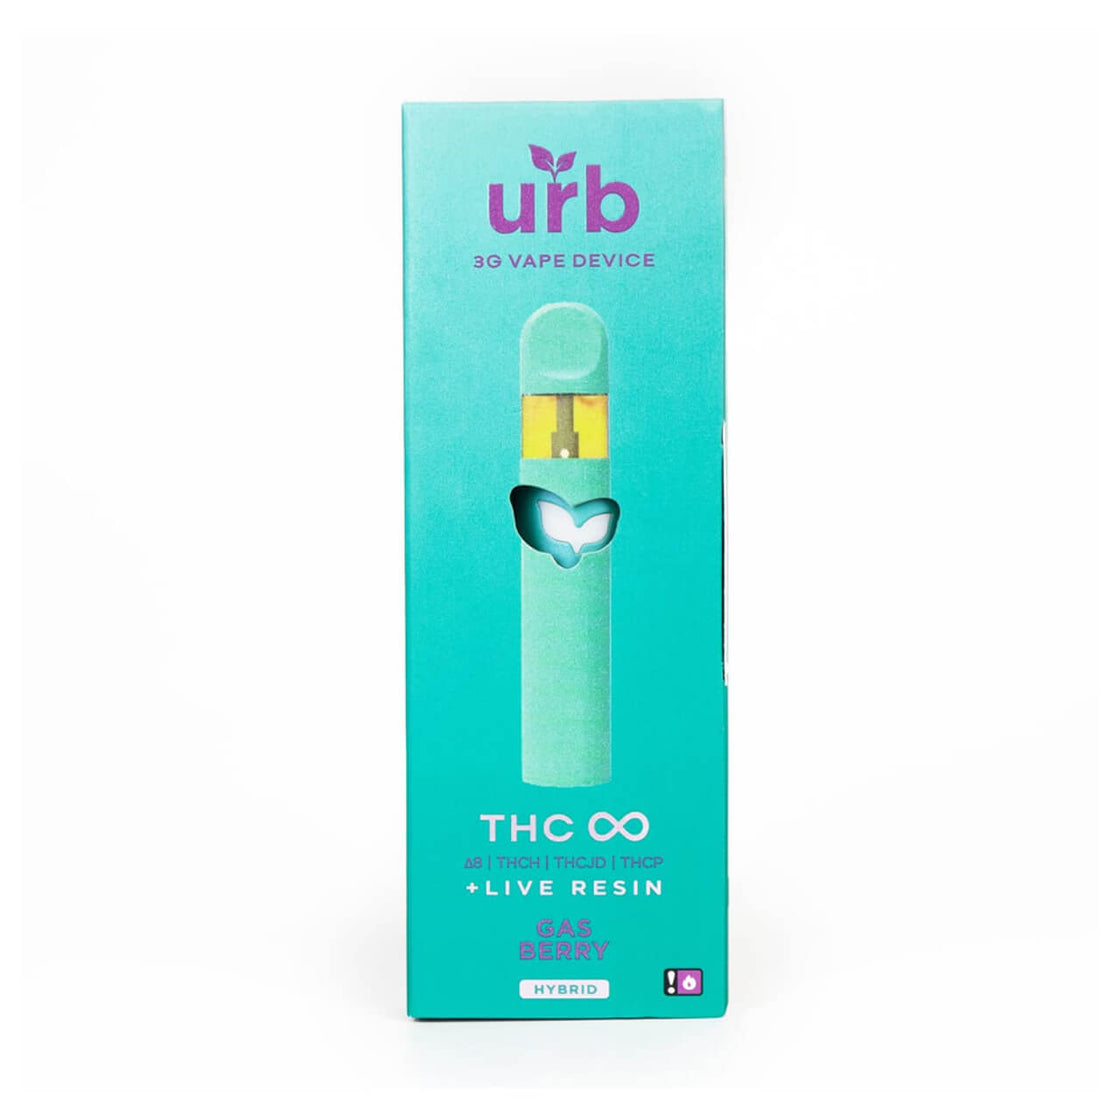 URB THC INFINITY LIVE RESIN 3GM D8 + THCH + THCJD +THCP DISPOSABLE